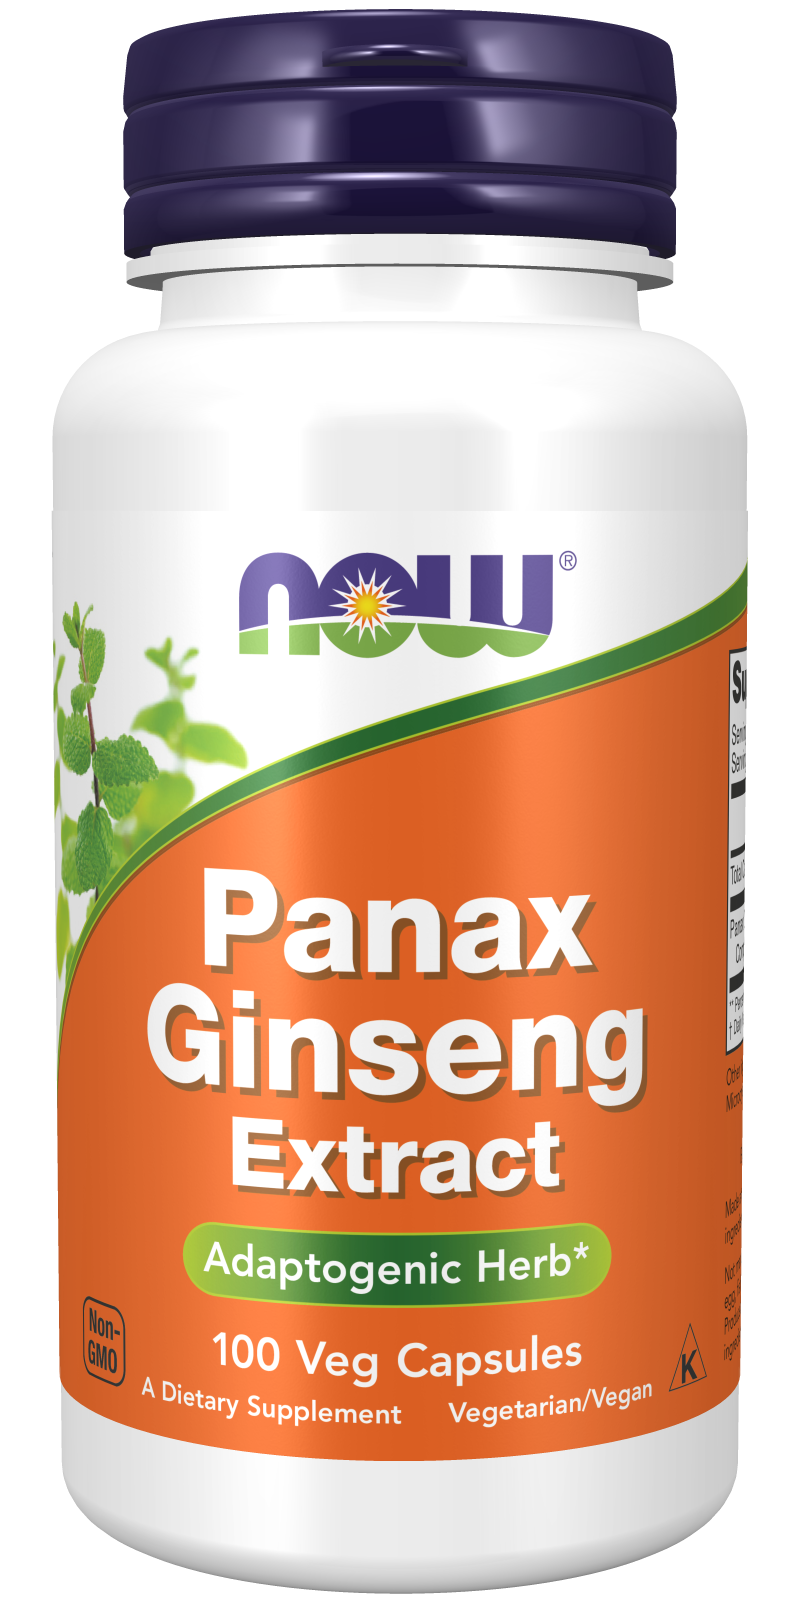 Panax Ginseng Extract - 100 Veg Capsules Bottle Front